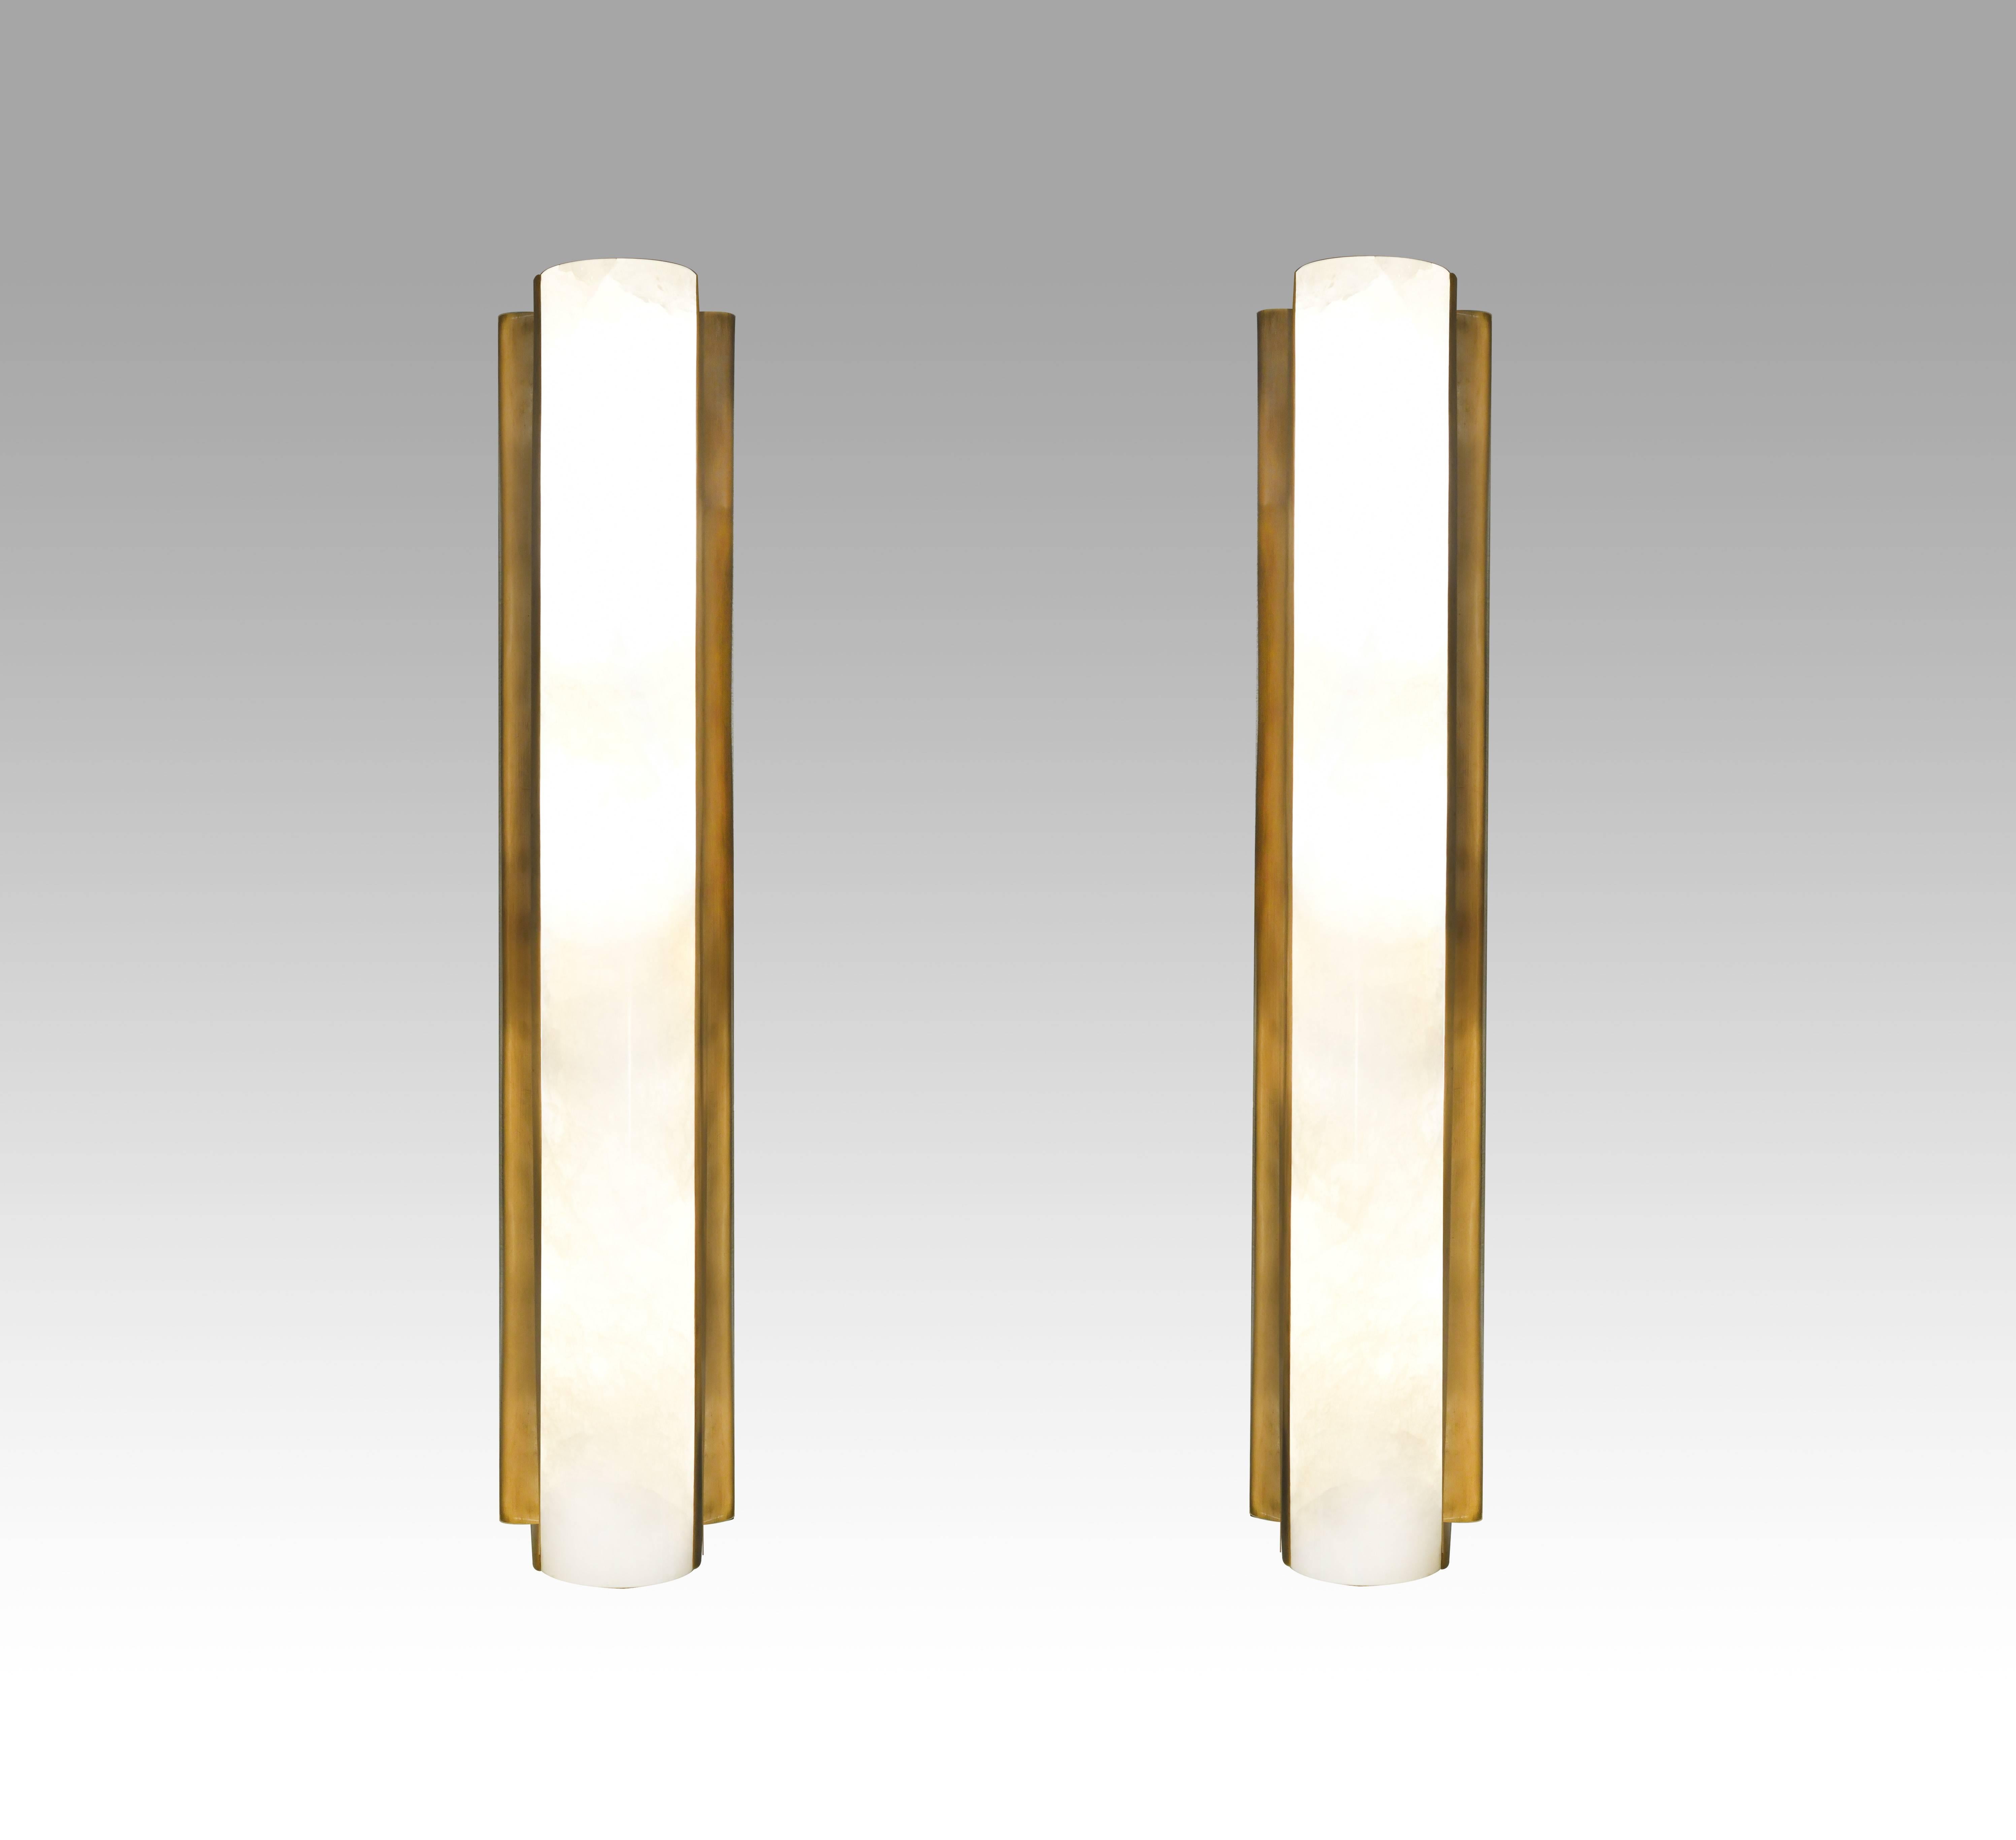  pair of elegant form long tube rock crystal sconces by Phoenix gallery NYC.antique brass finish.180w each sconce 
Custom size available.
